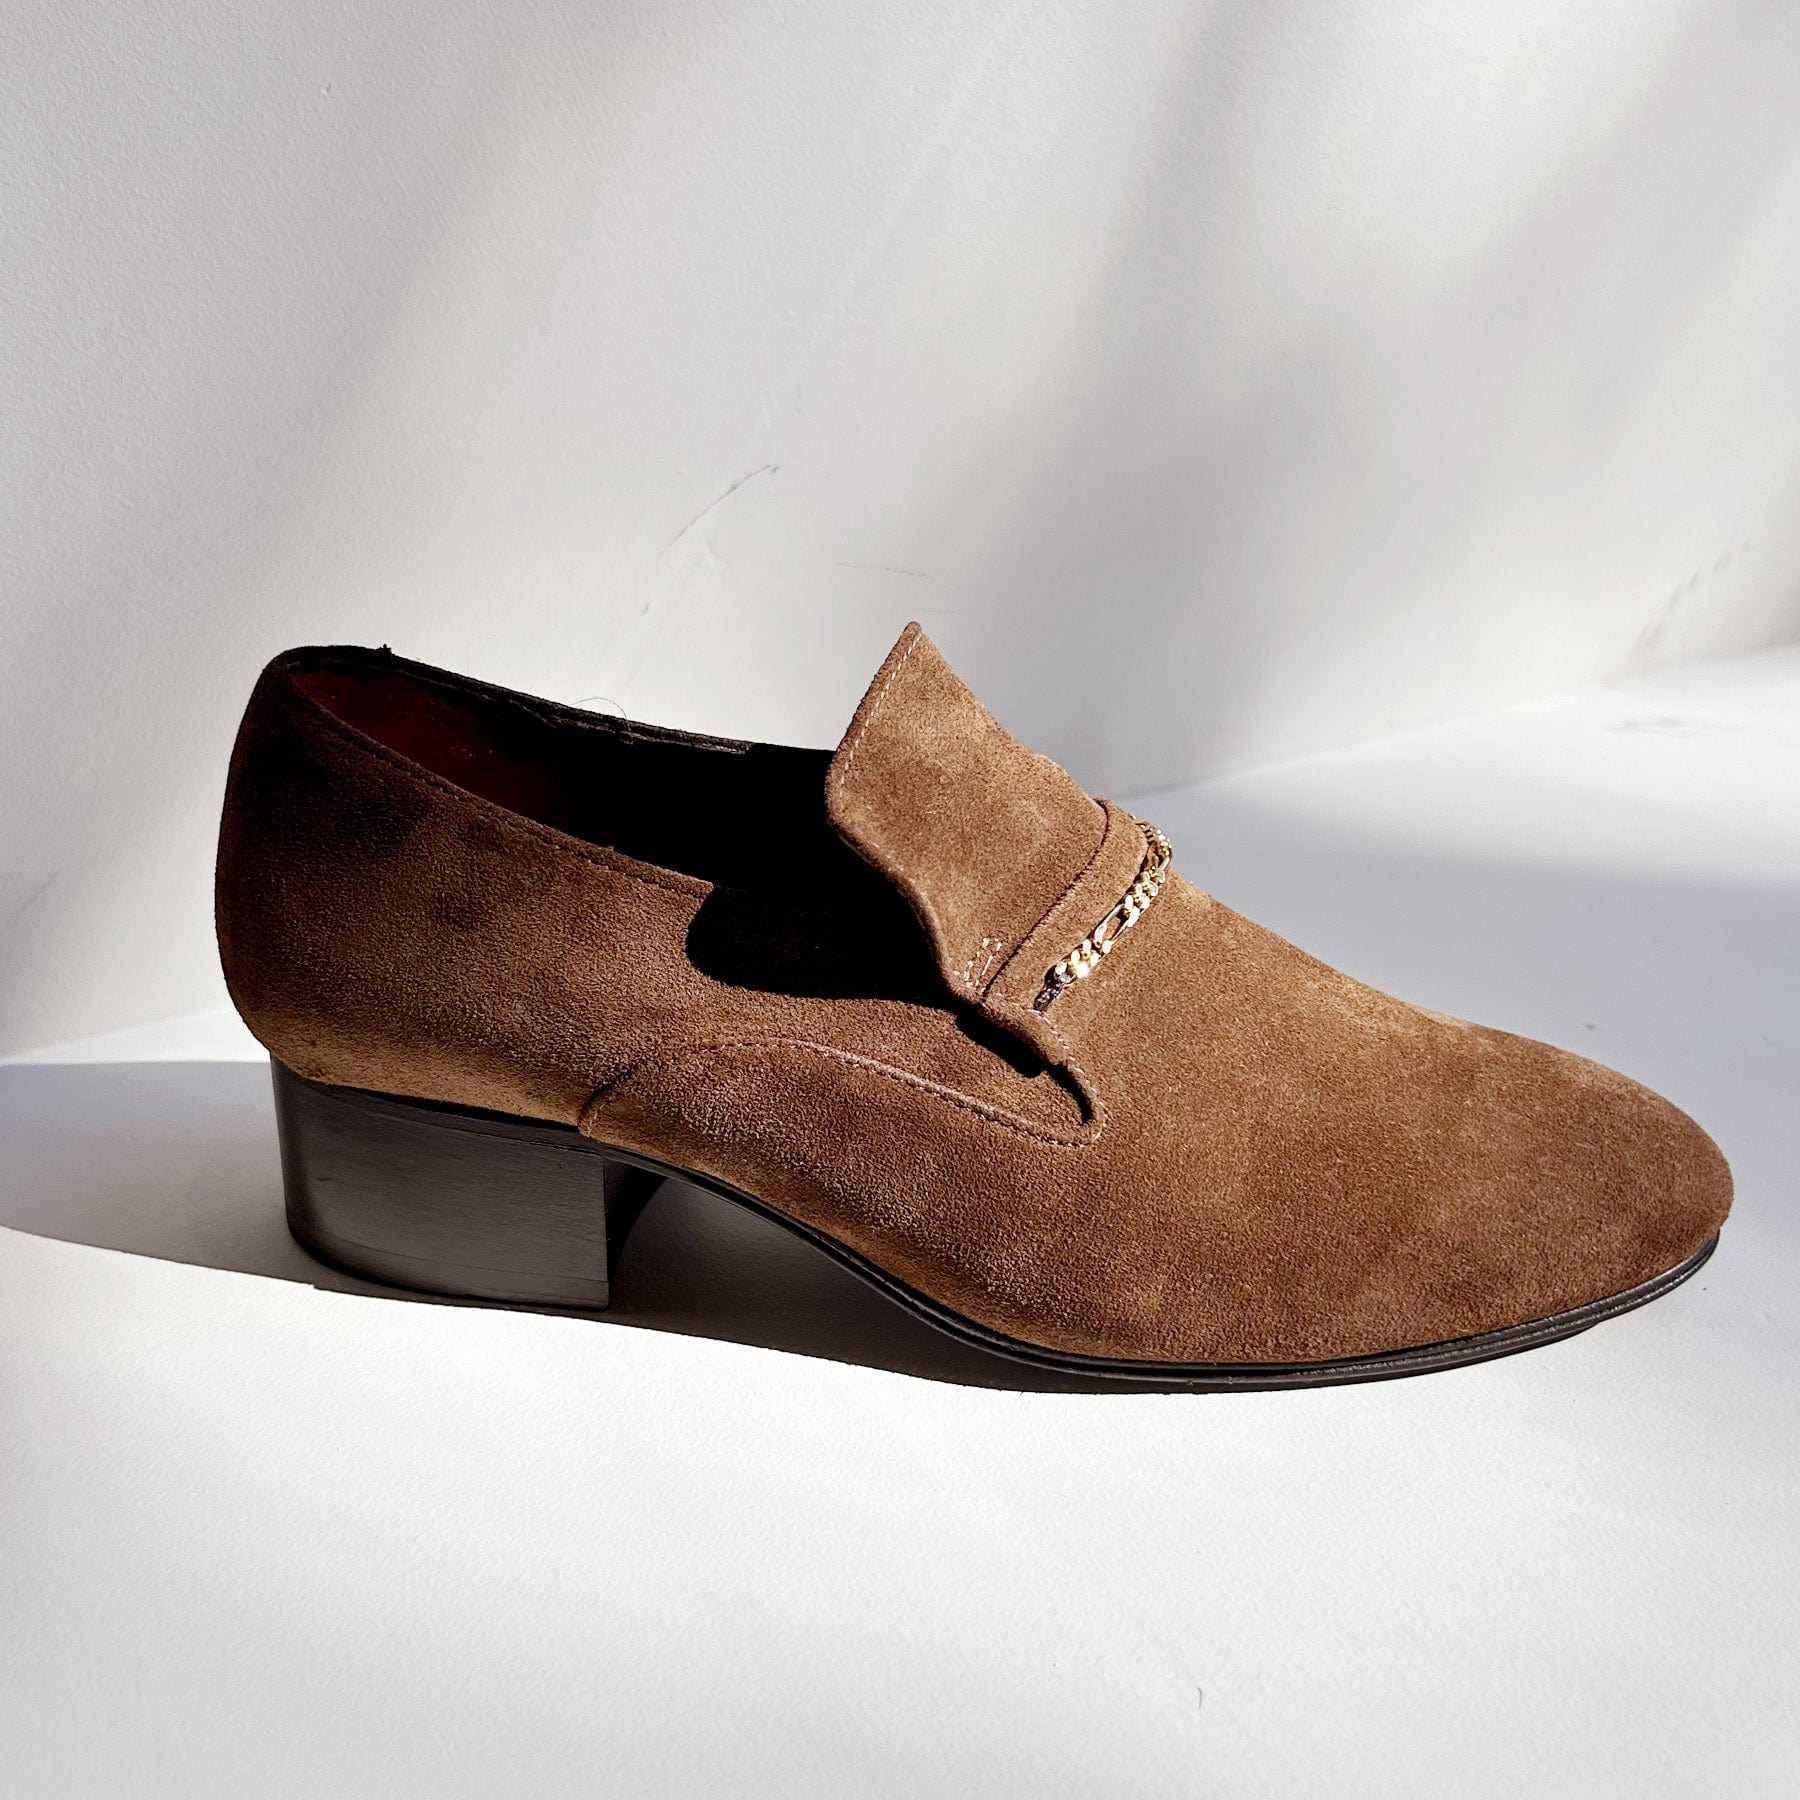 Montana Loafer in Chestnut Suede Shoes Anne Thomas   